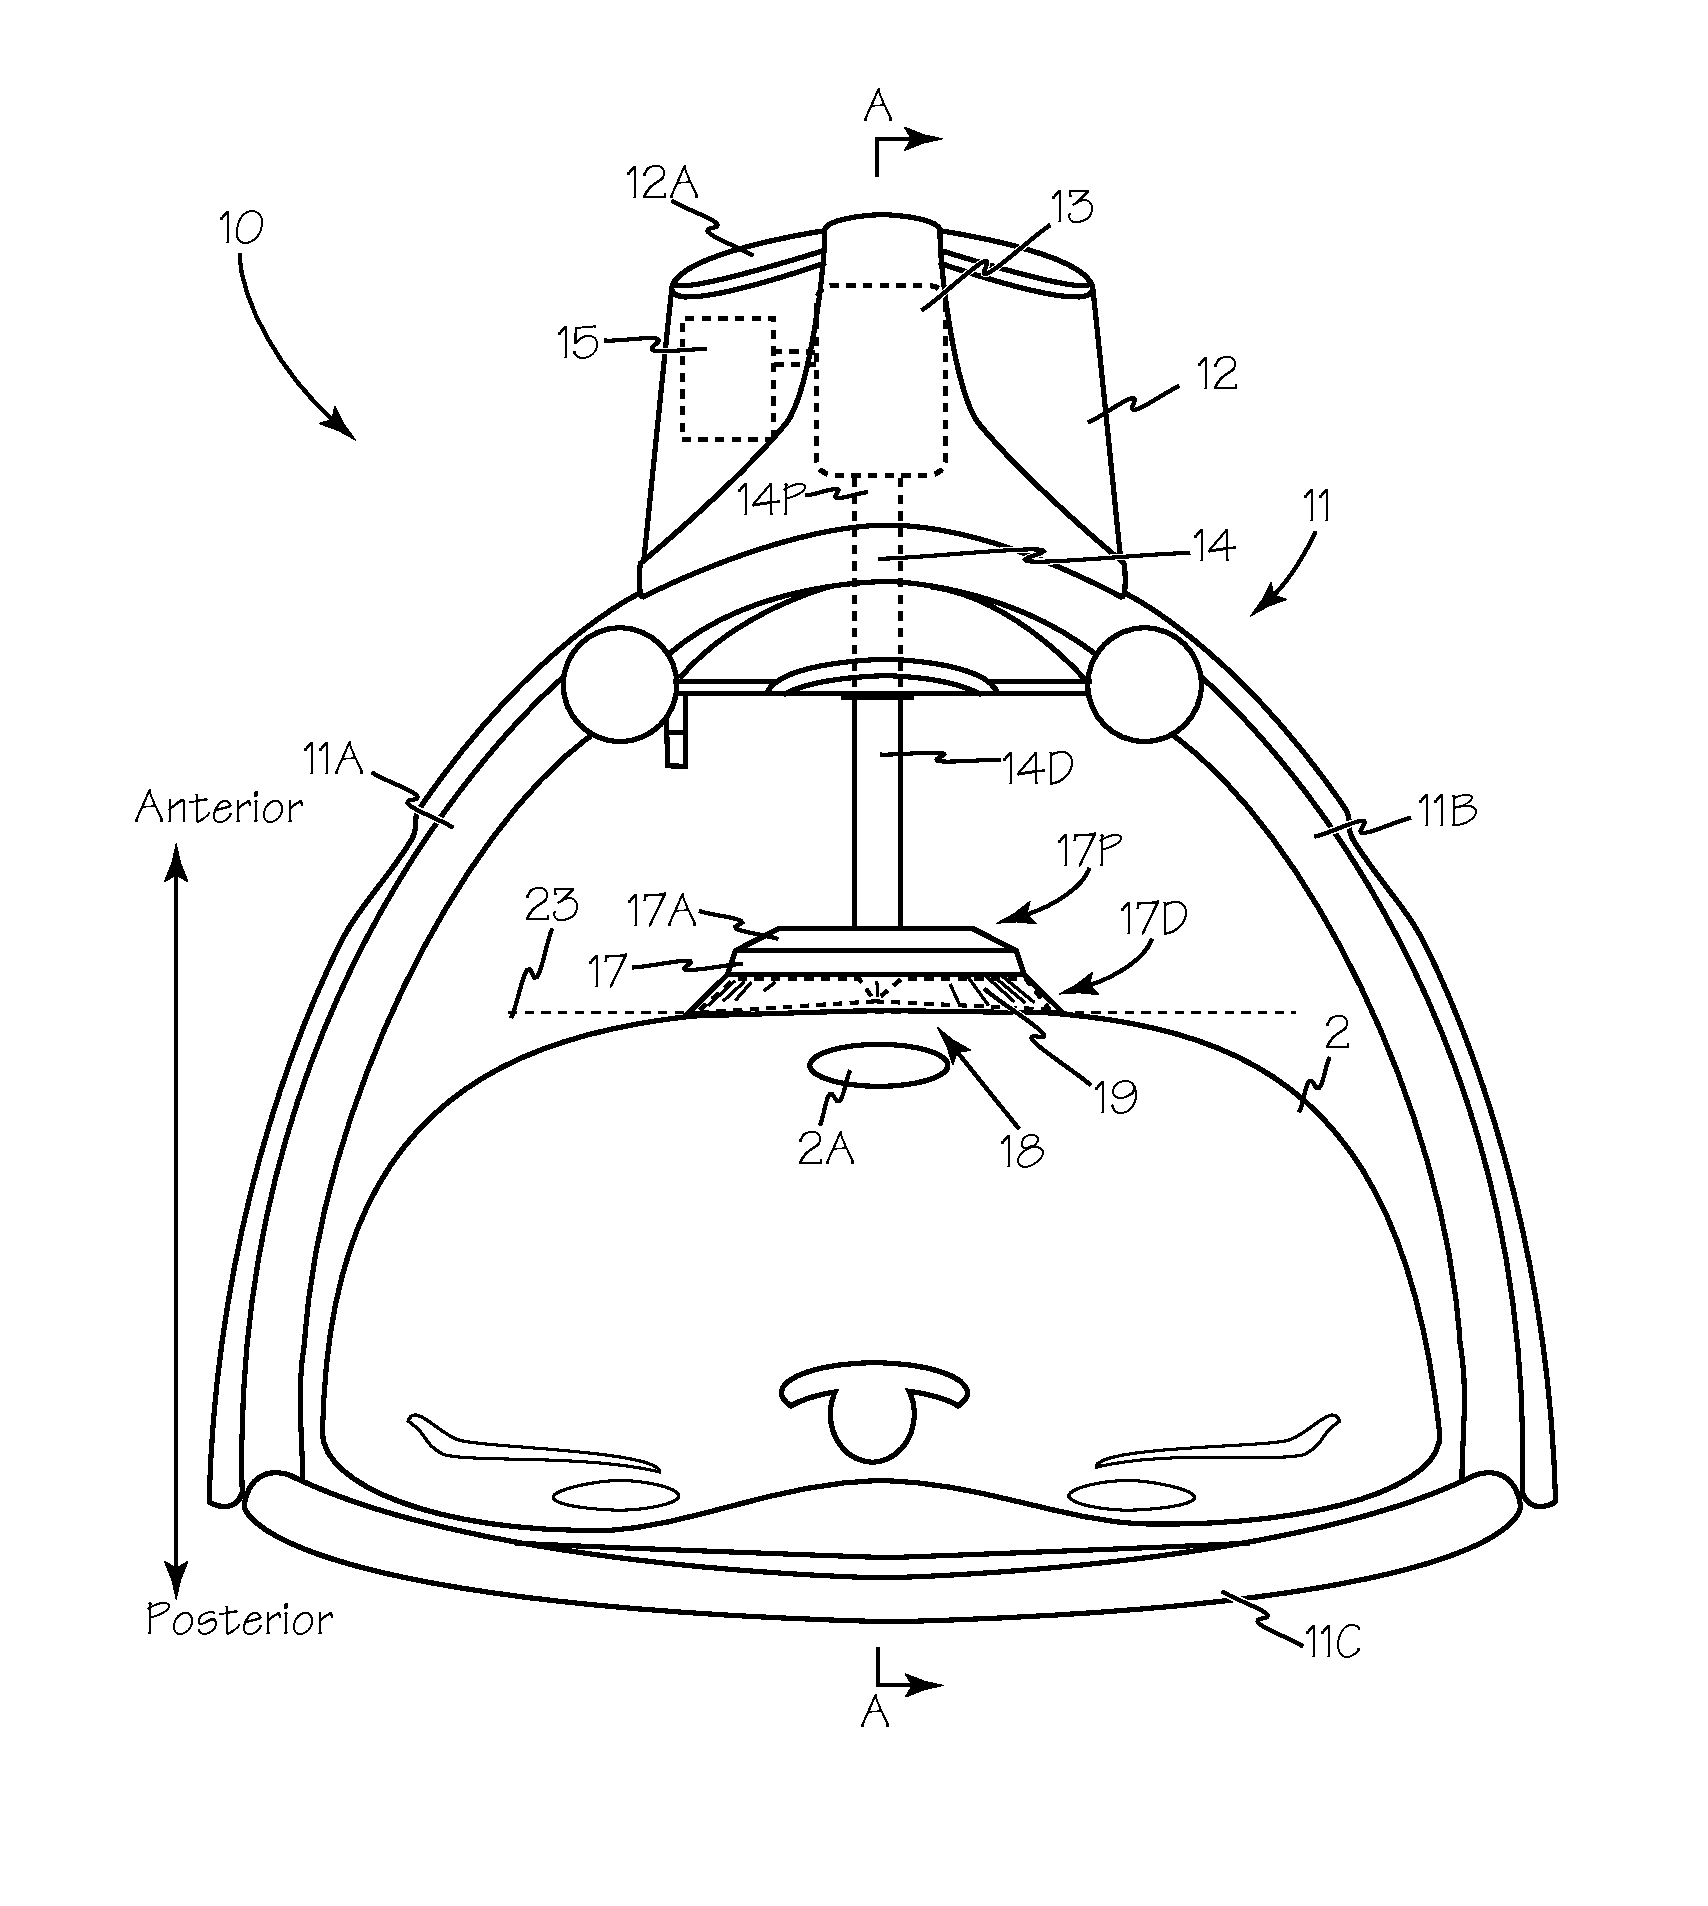 Method and Device for Performing Alternating Chest Compression and Decompression